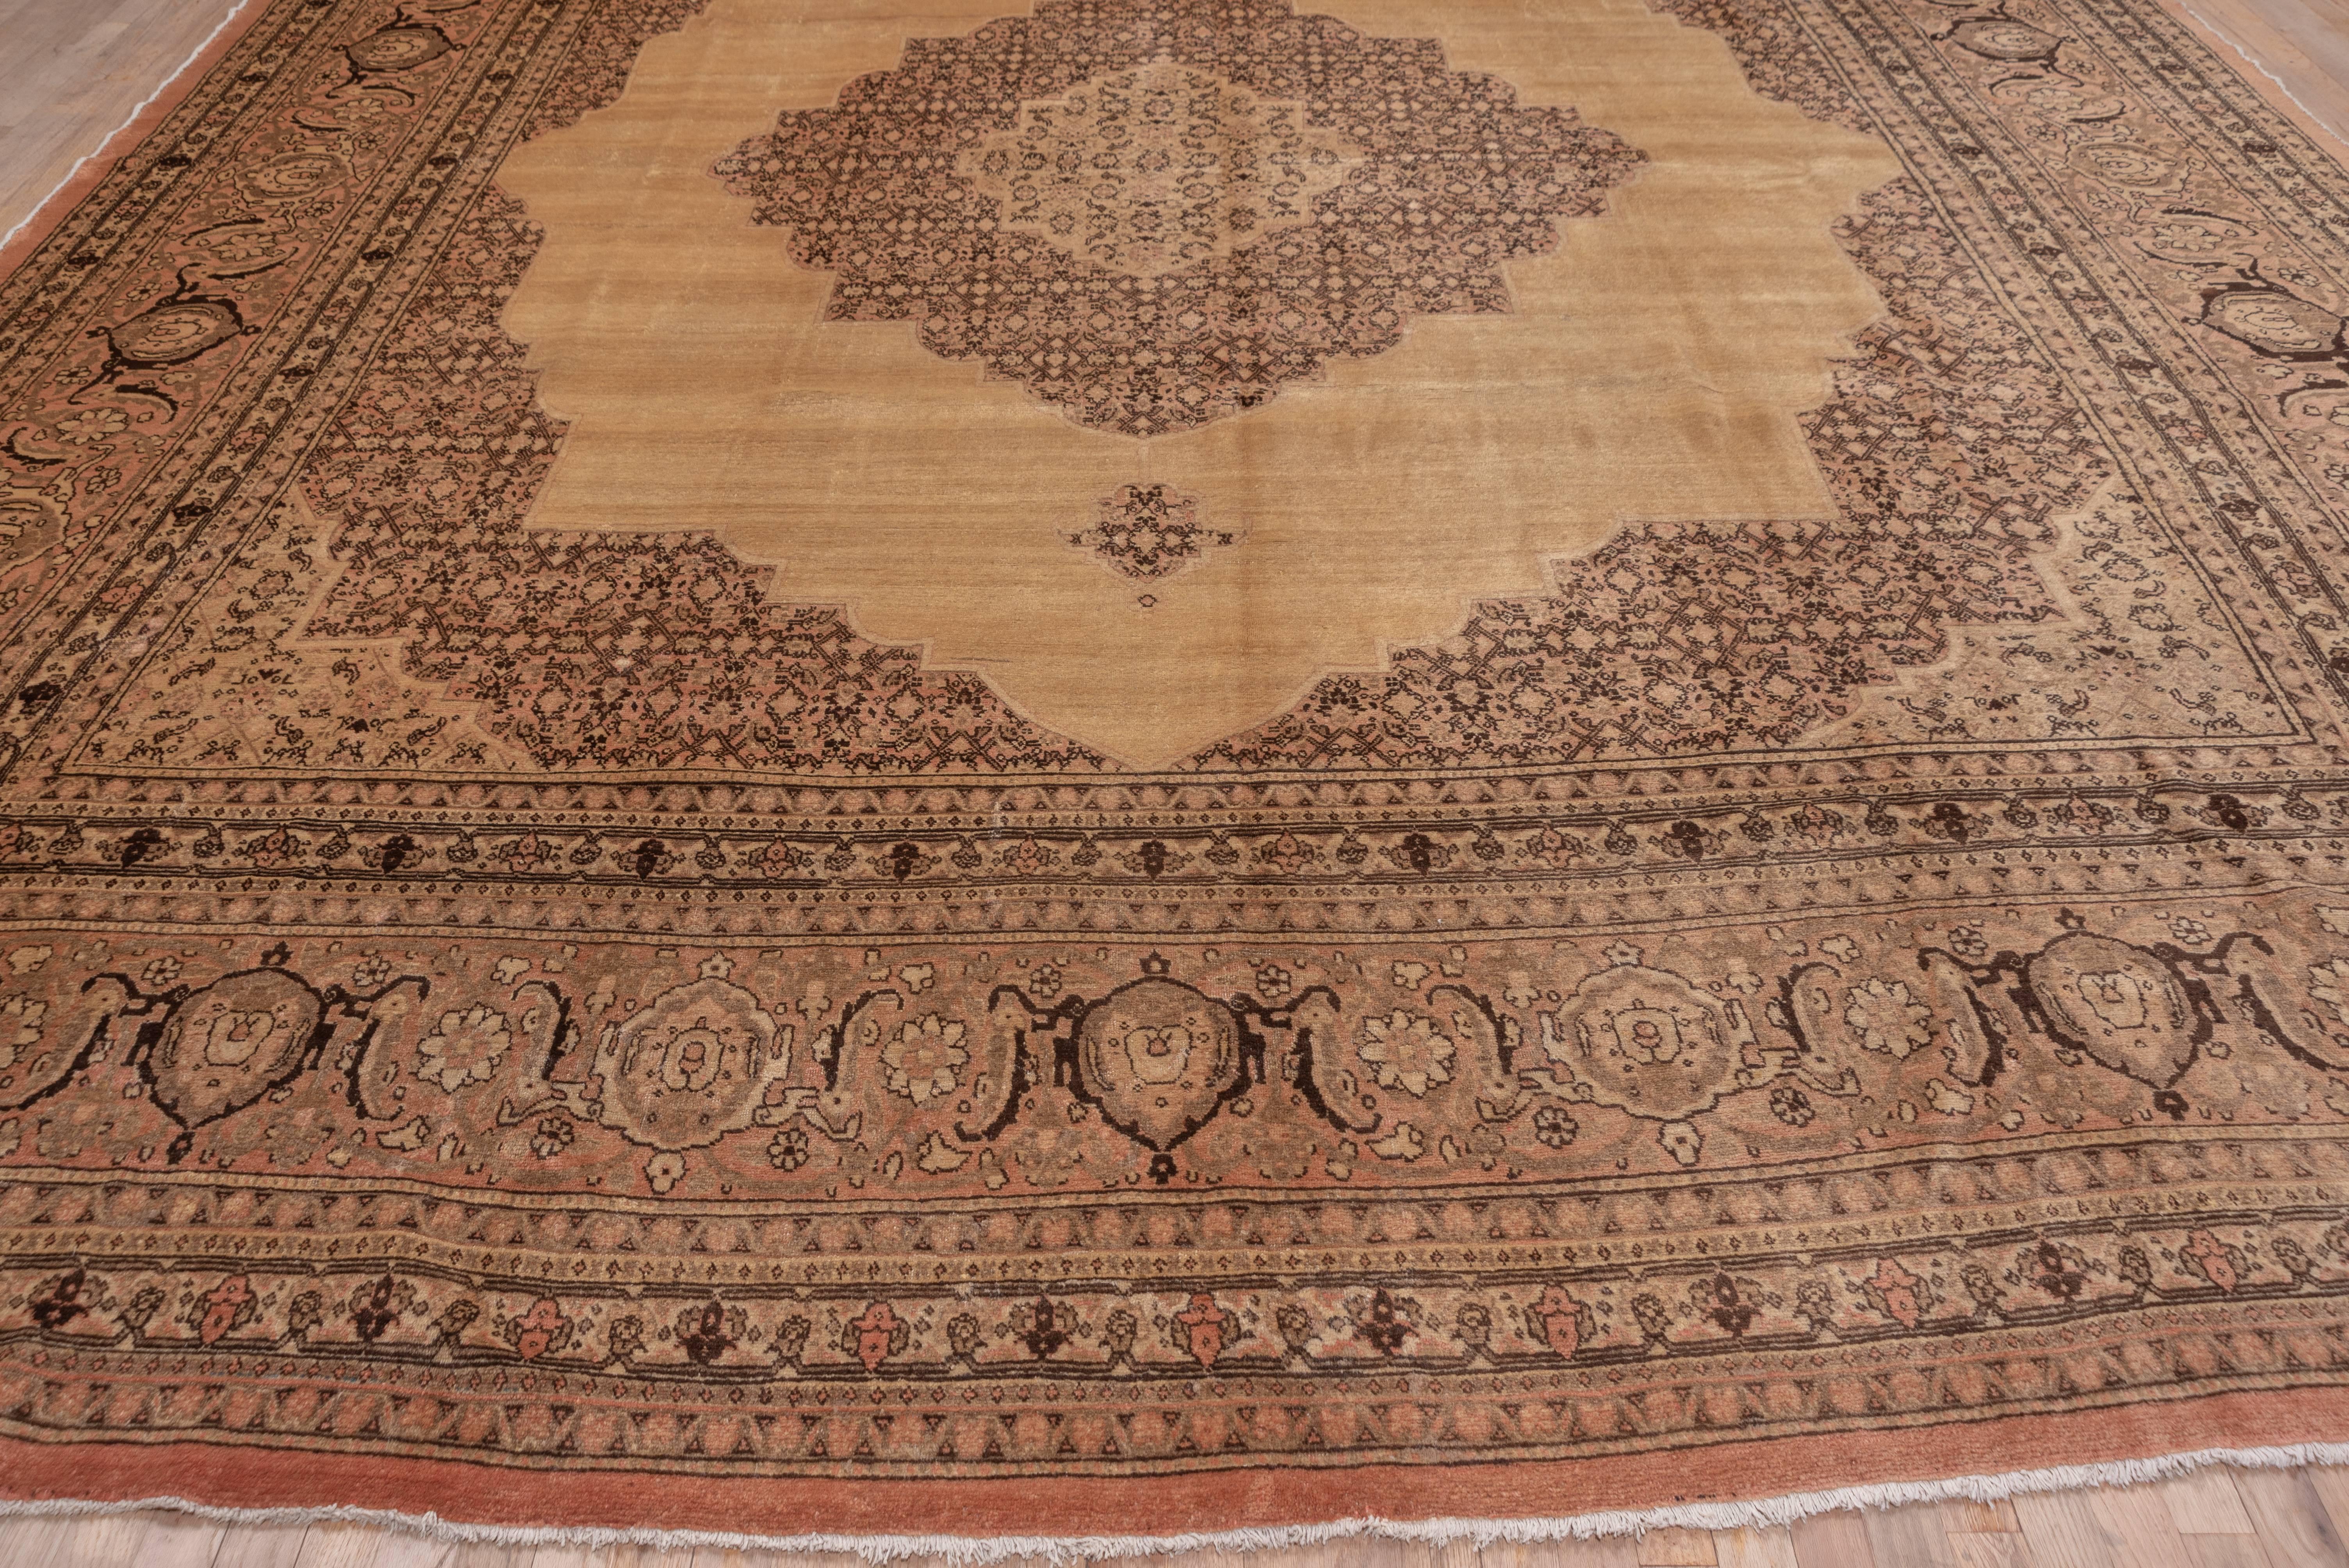 This good condition NW Persian urban carpet shows a classic bookcover pattern of an open straw-ivory field with a large pendanted medallion and developed en suite corners detailed in dark brown. Bold turtle palmettes with umber accents dominate the